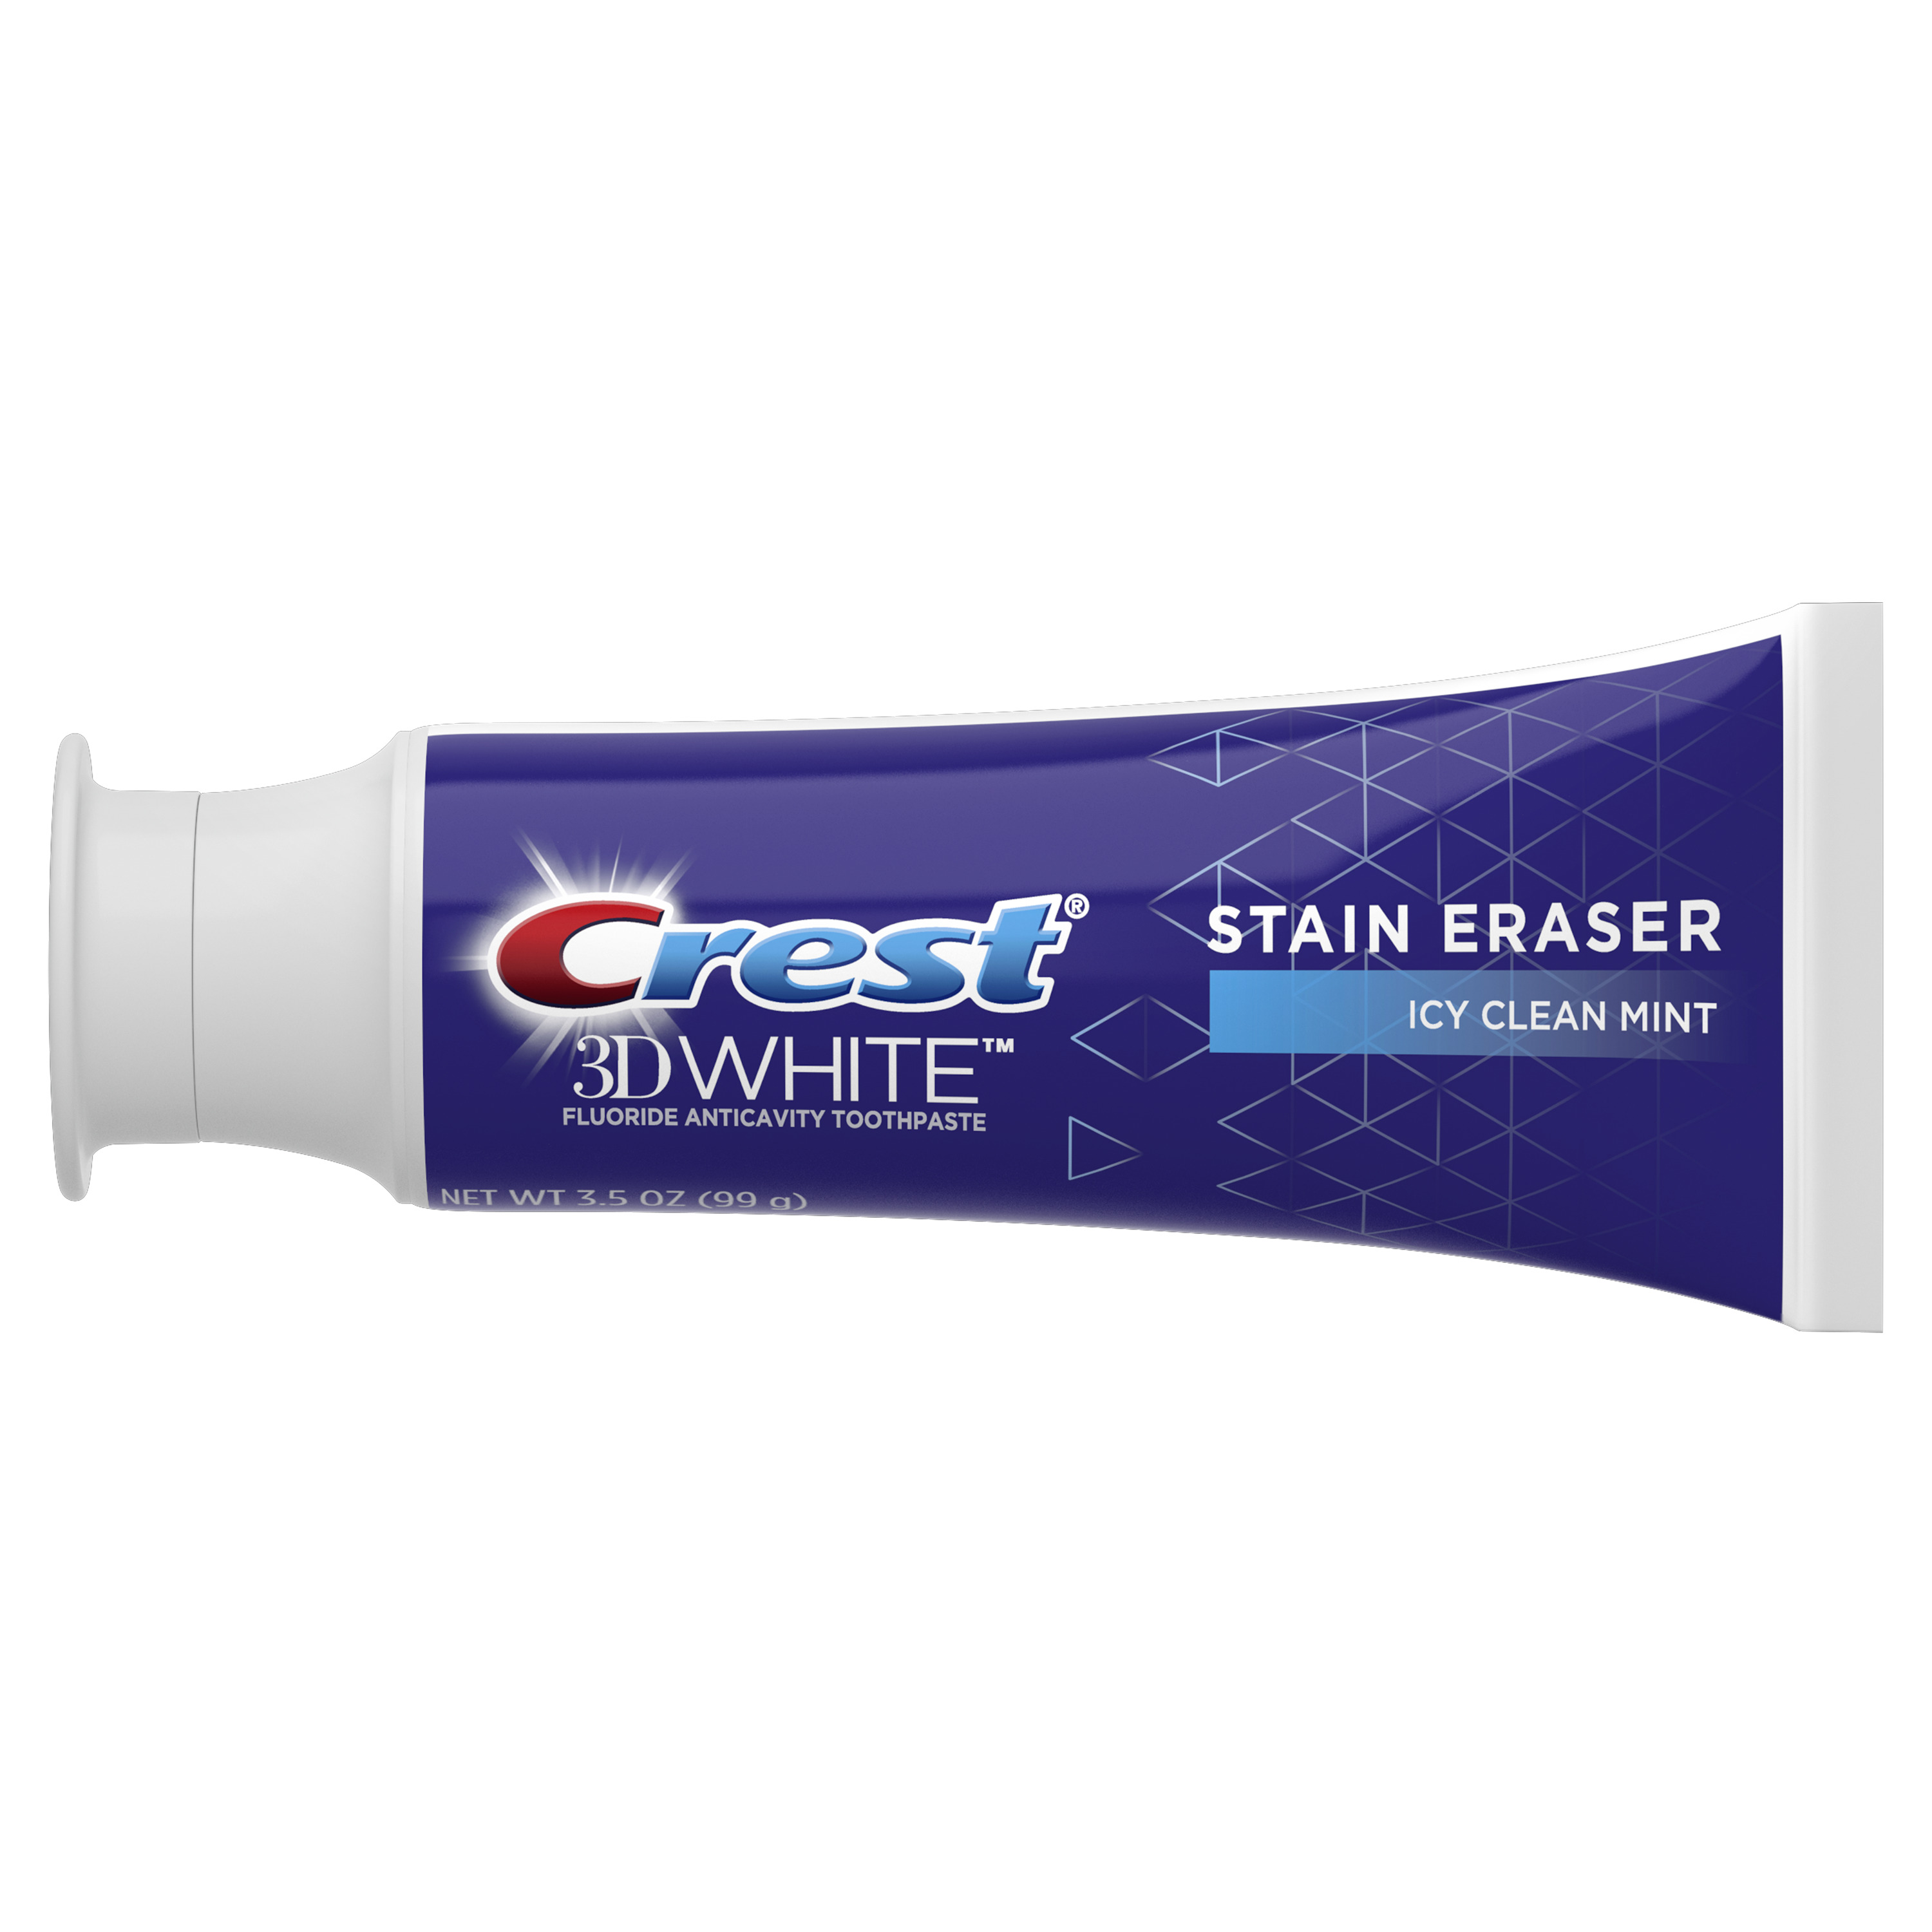 Crest 3D White Stain Eraser Whitening Toothpaste, Icy Clean Mint, 3.5 Oz (2 Pack) - image 7 of 7